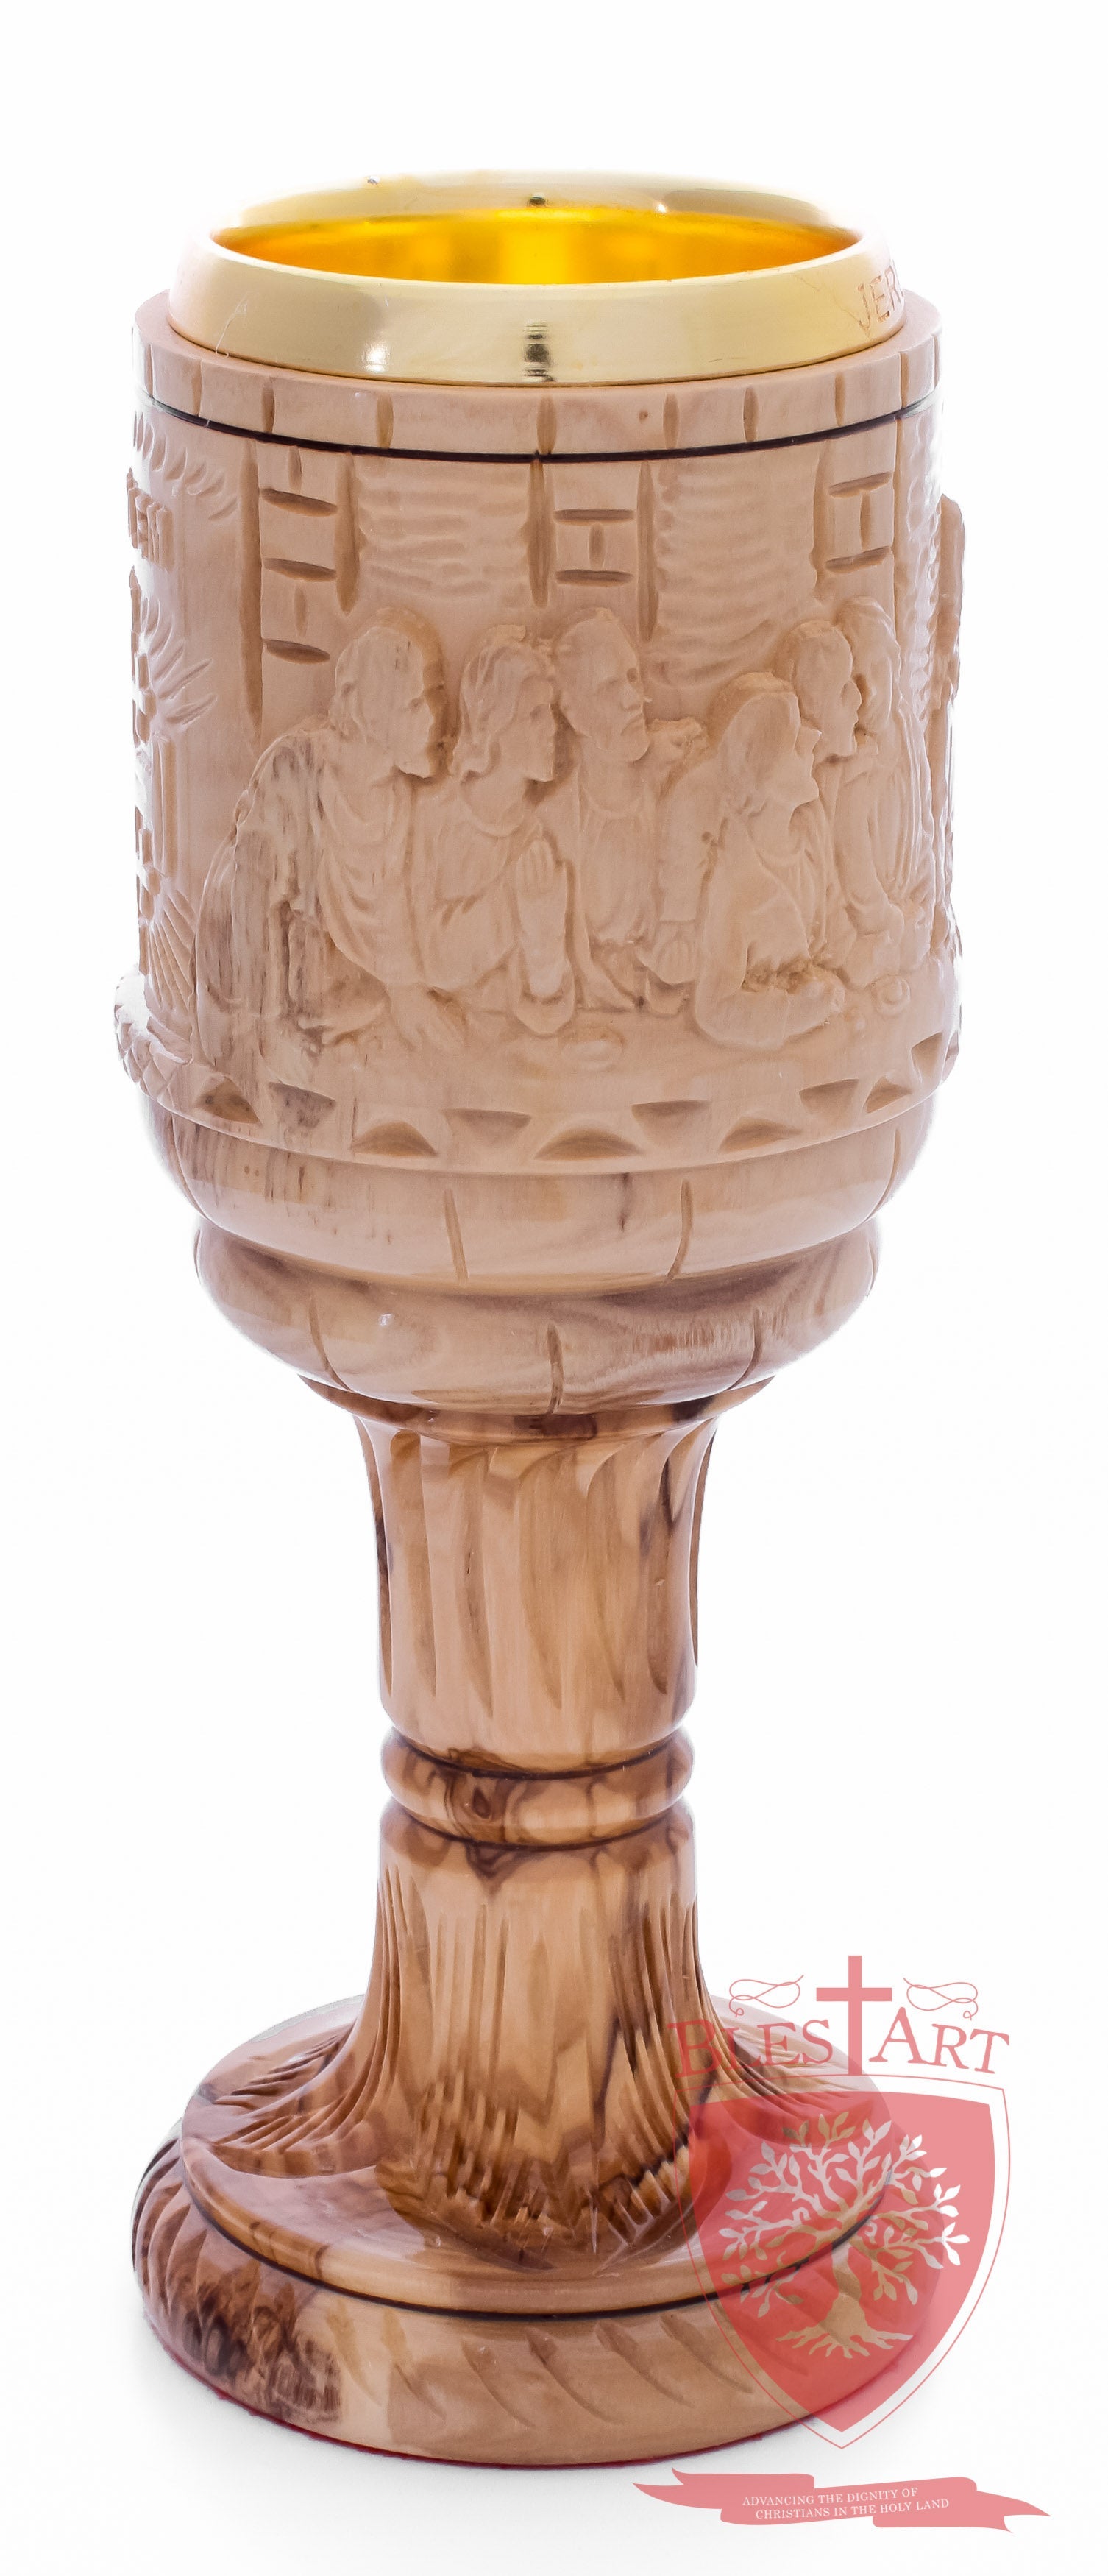 Chalice with the carving of the Last Supper image